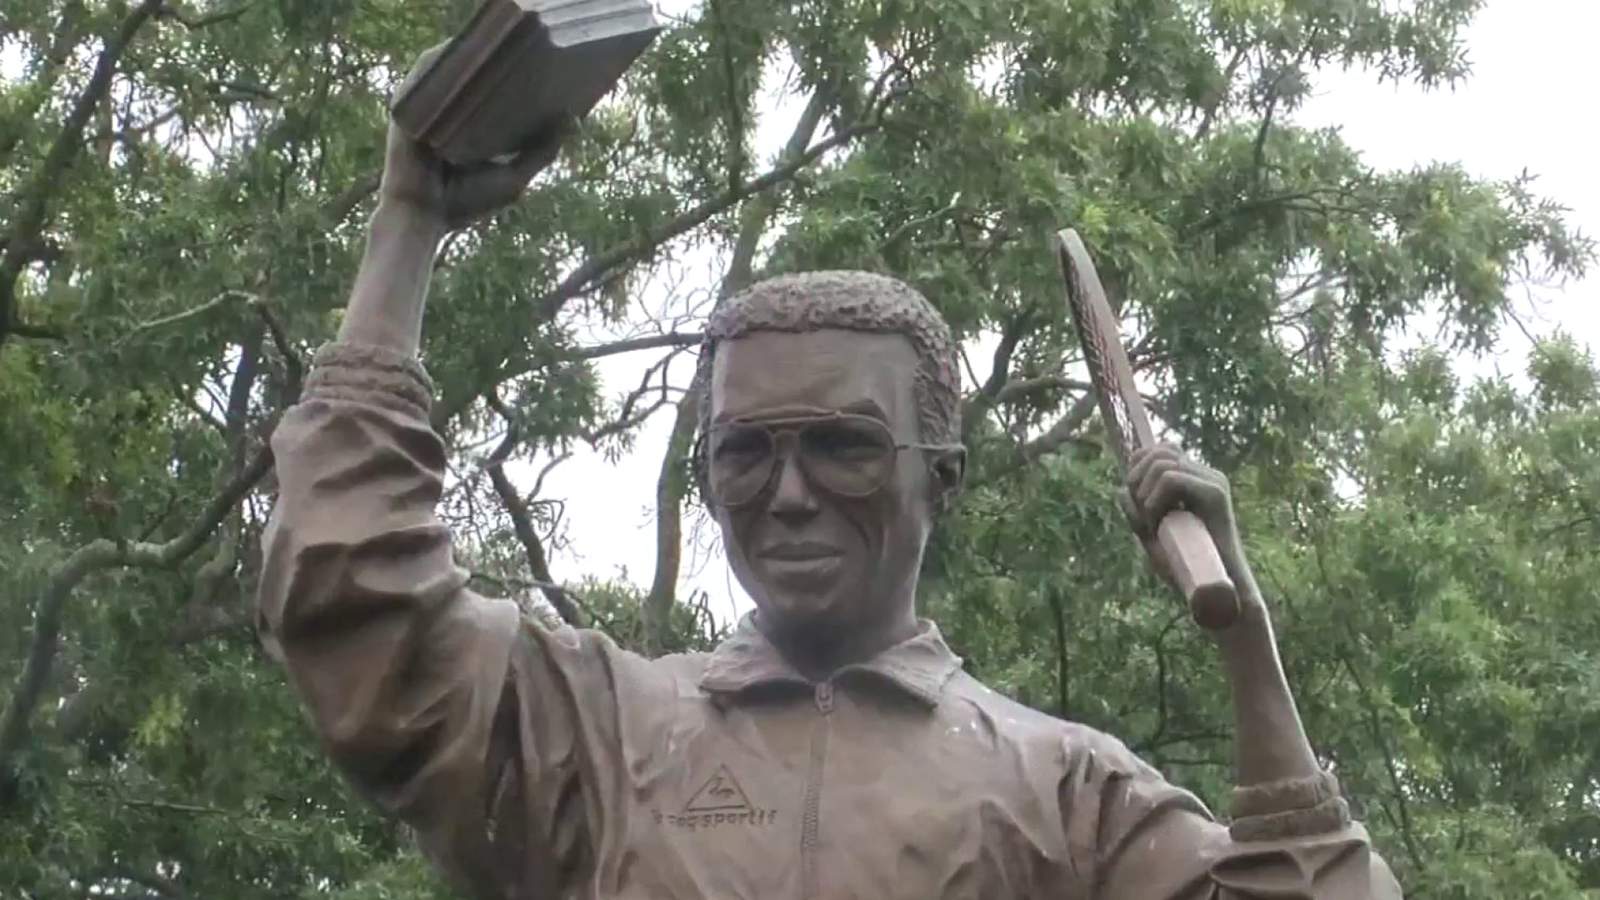 Statue to tennis star Arthur Ashe to stay put in Richmond